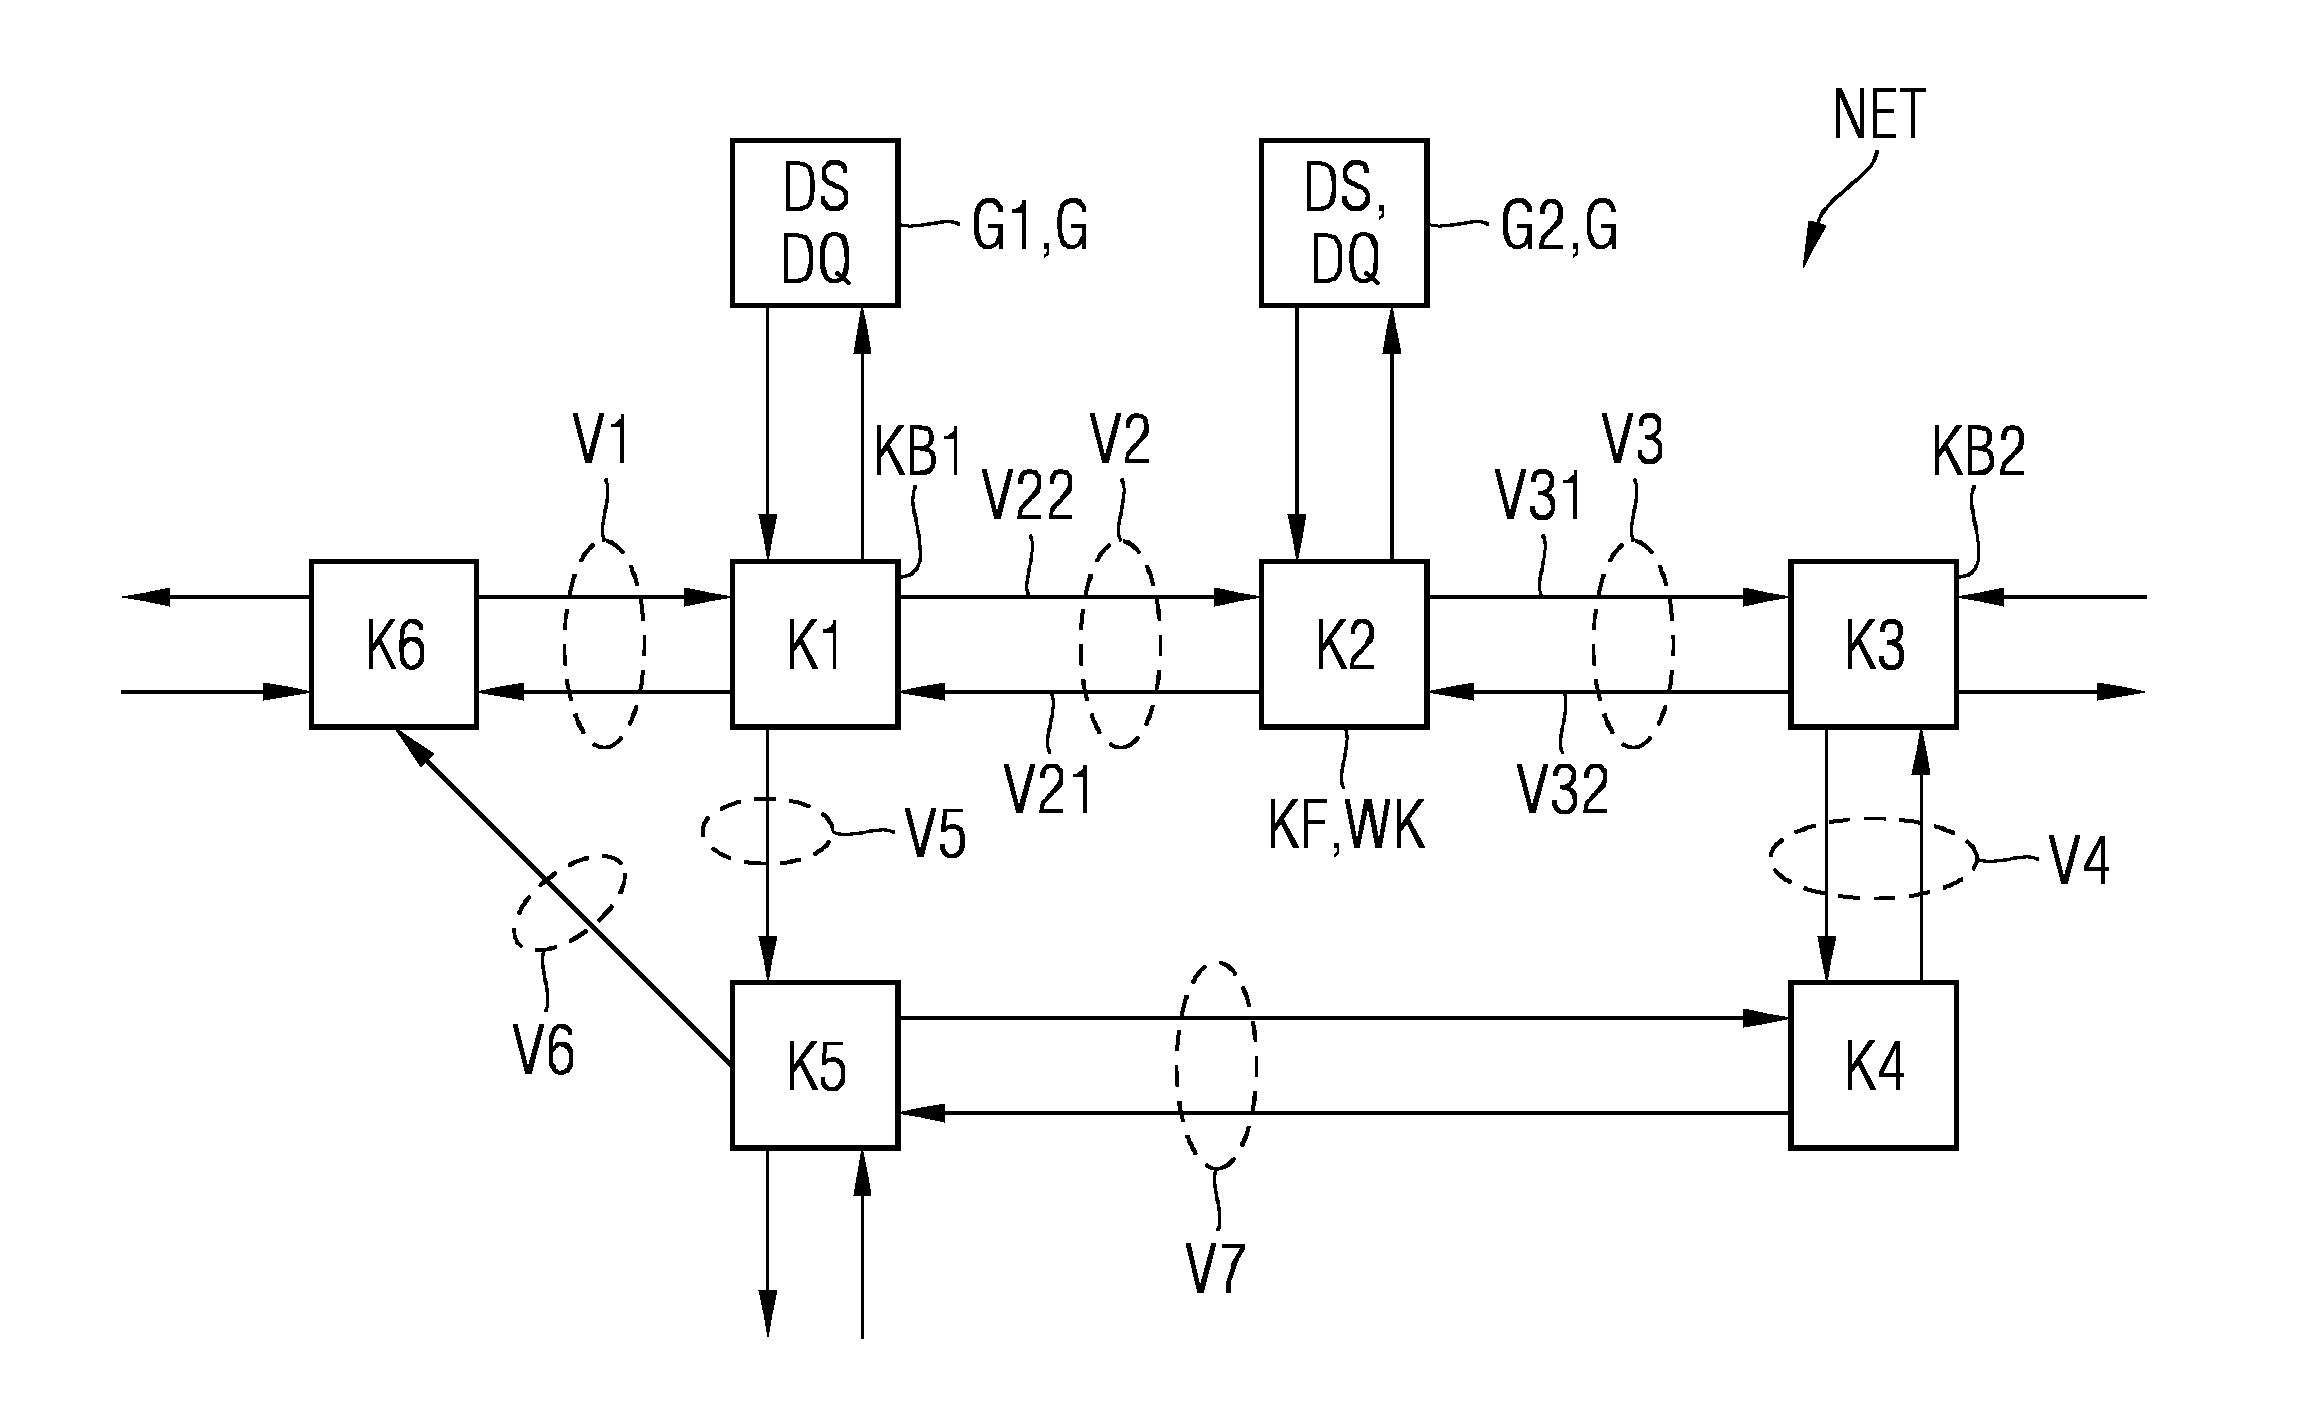 Detection of a faulty node in a network